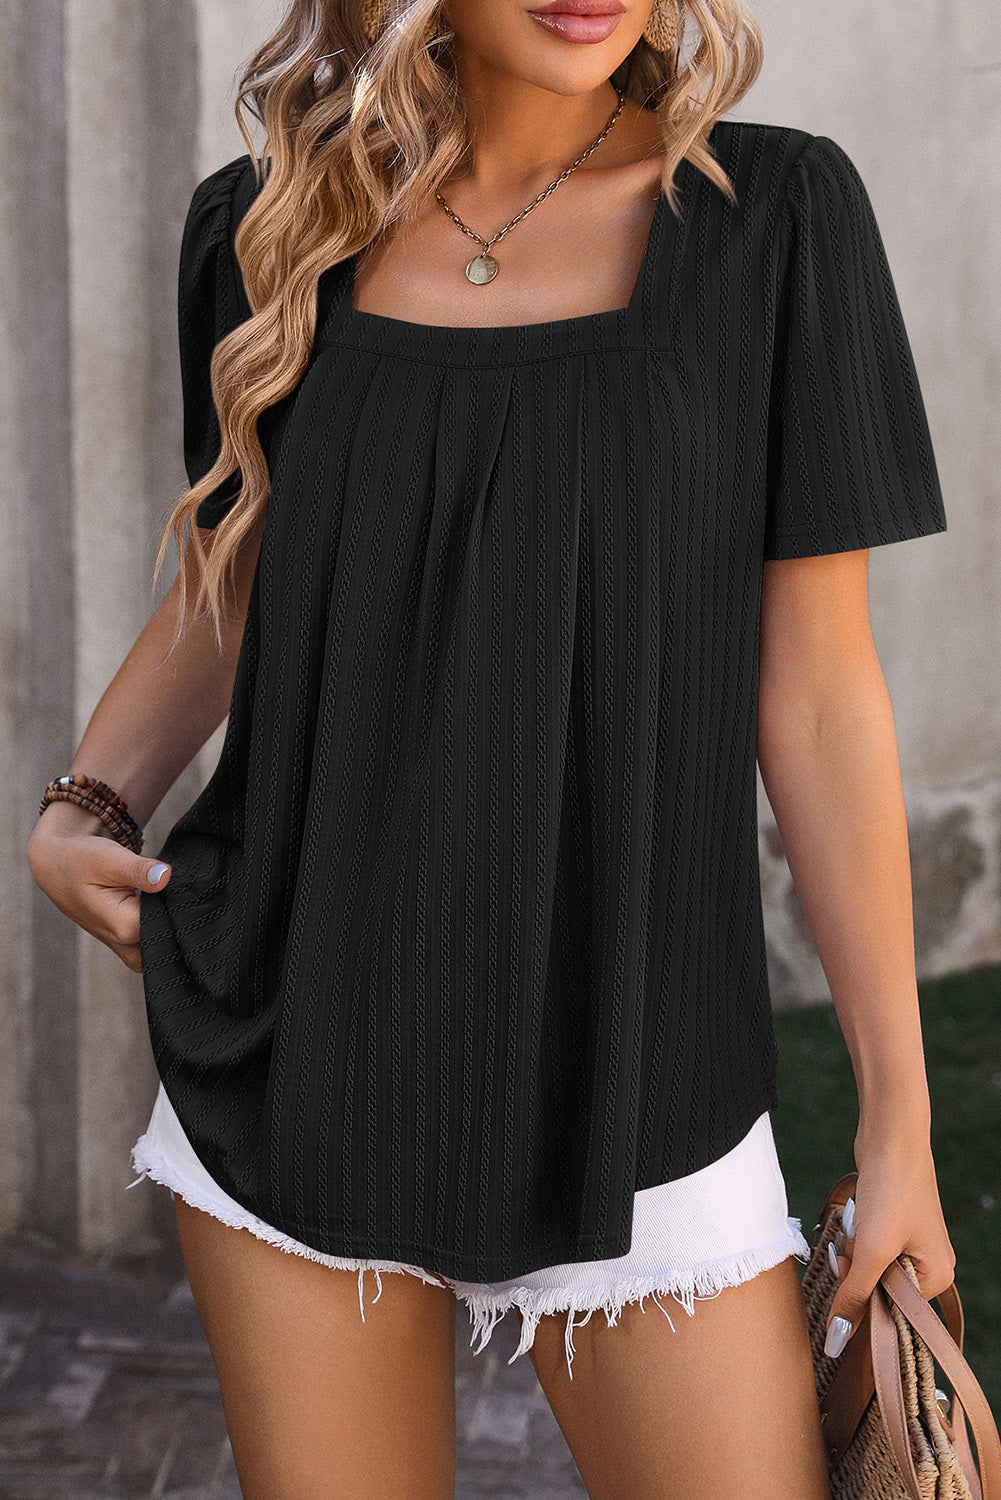 Black Chic Texture Square Neck Short Sleeve Babydoll Blouse